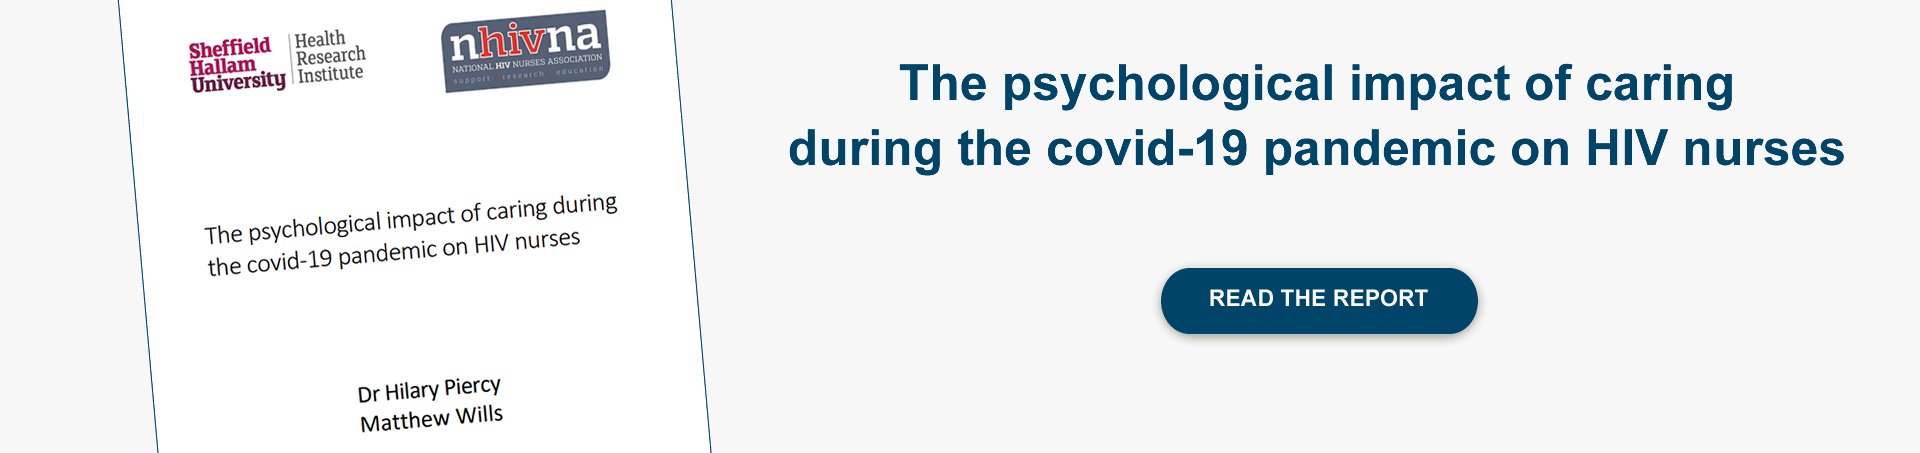 The psychological impact of caring during the covi